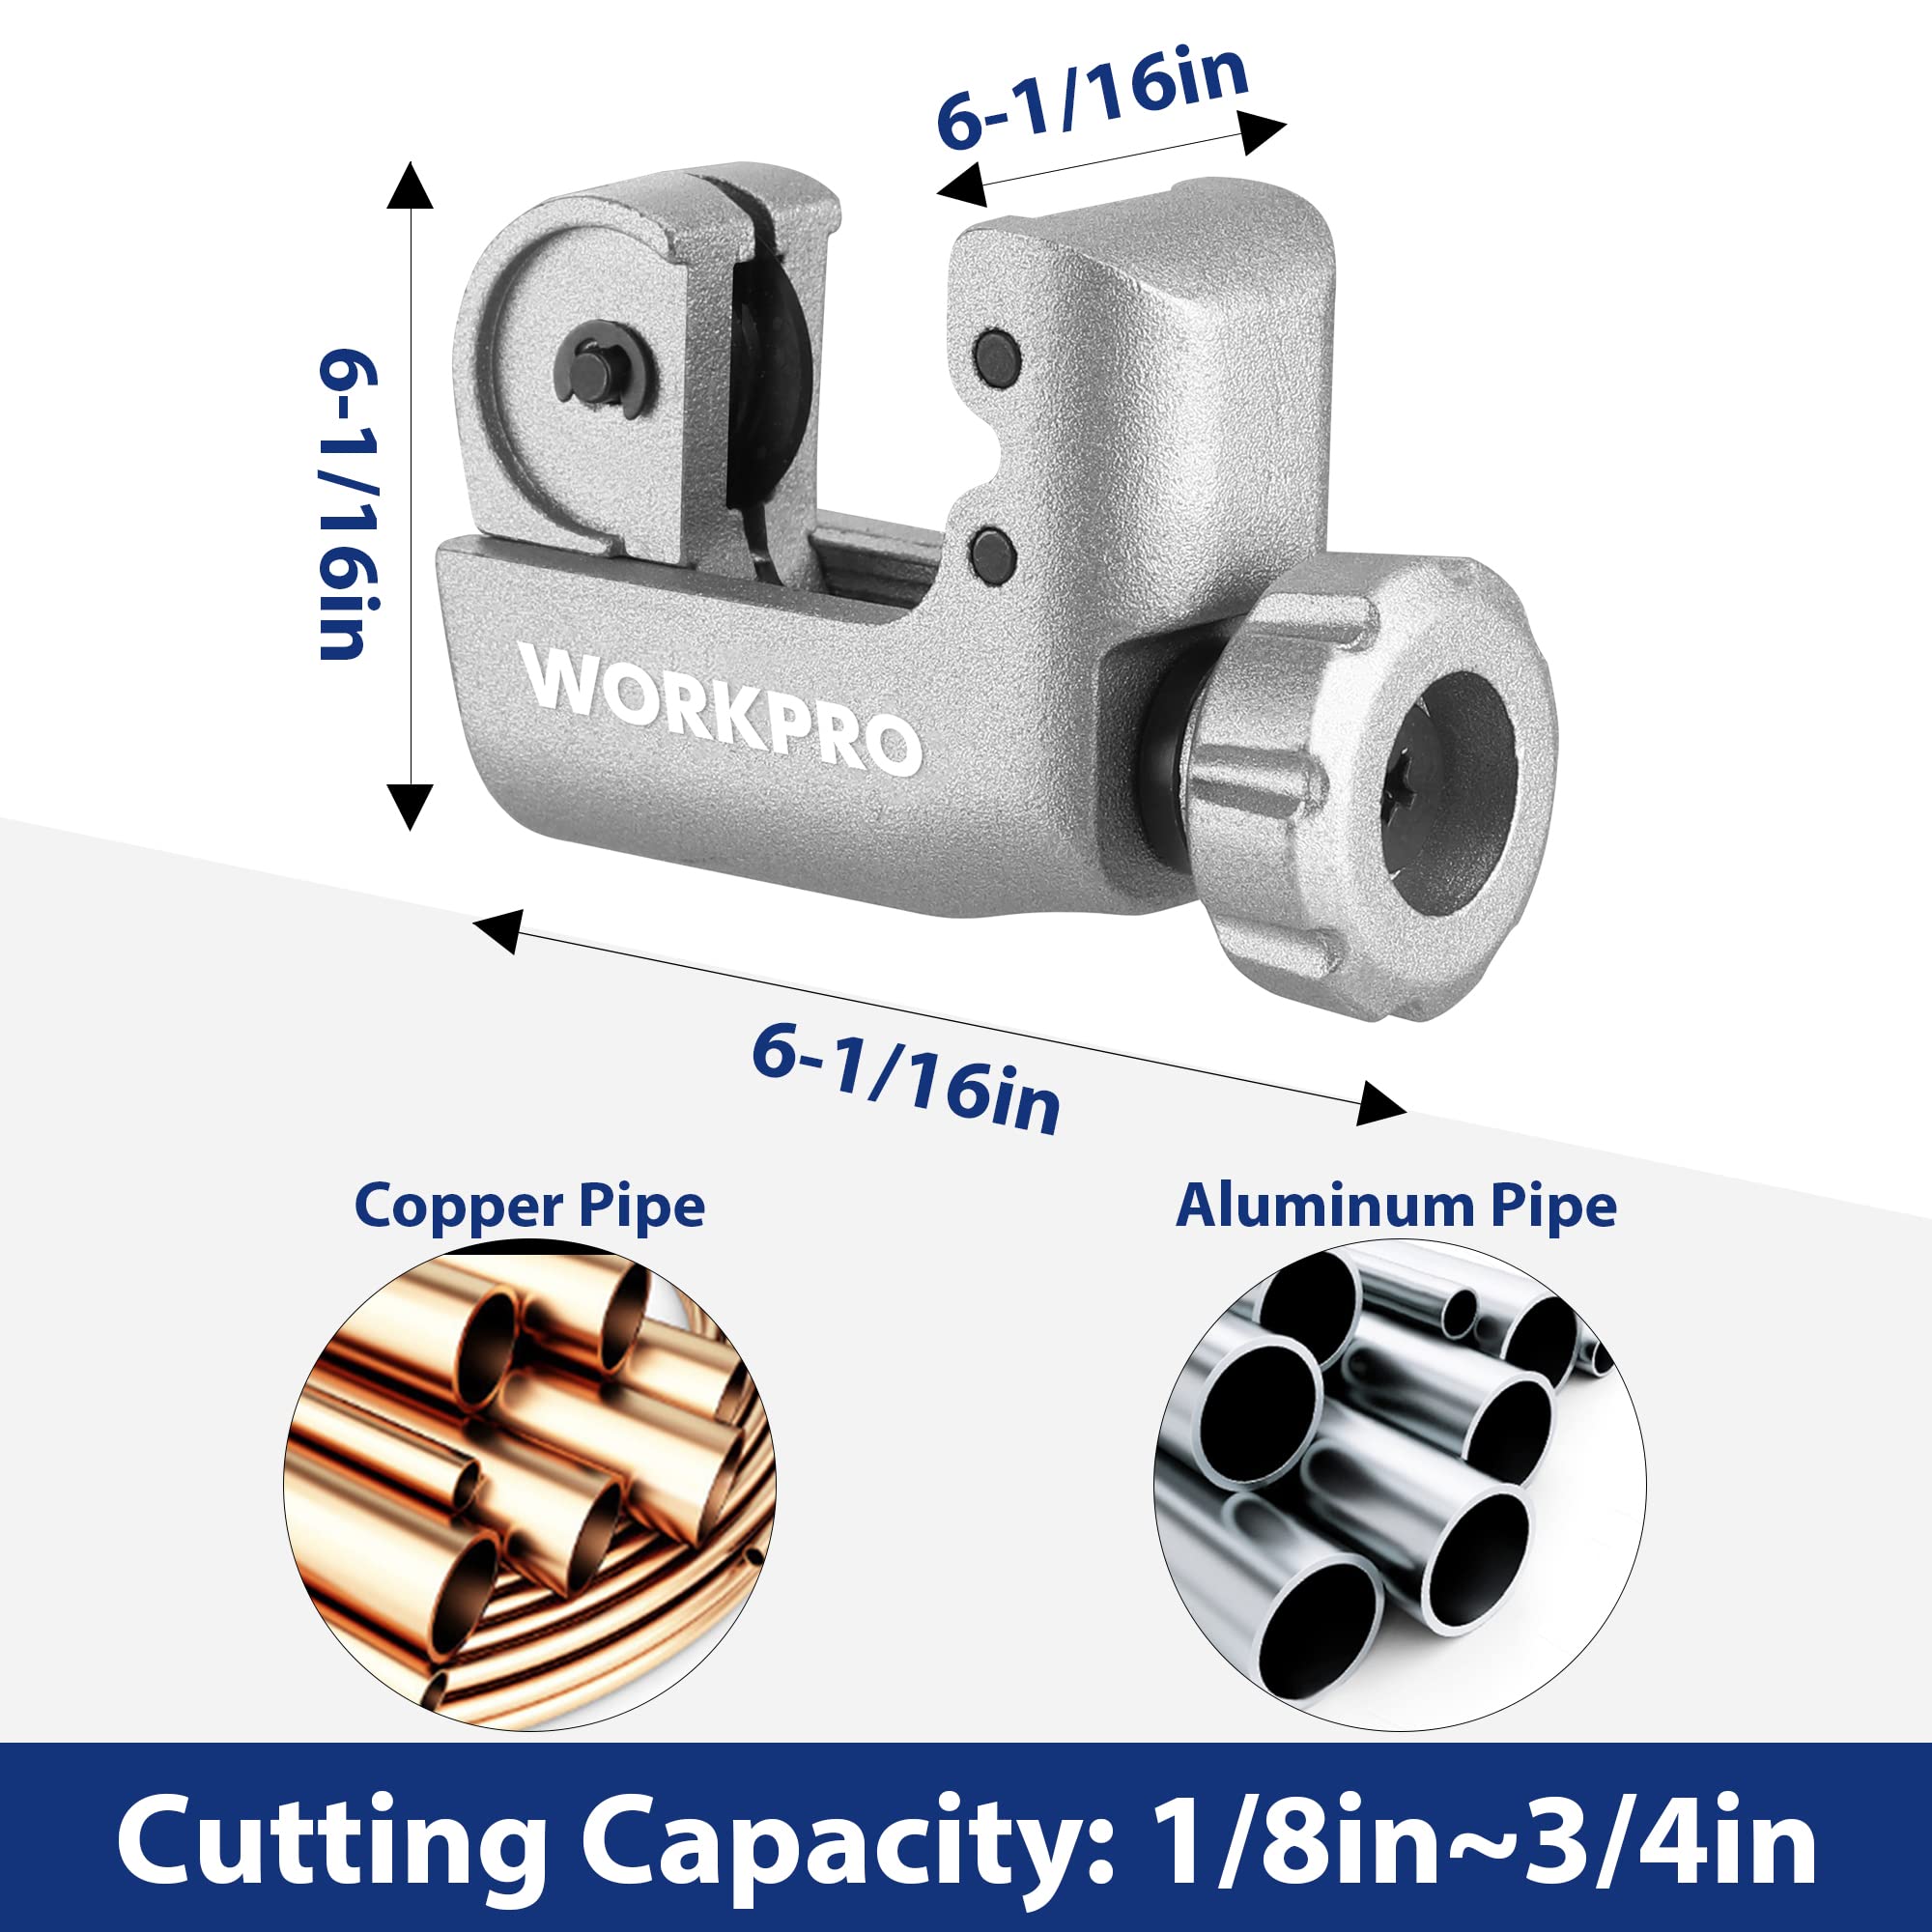 WORKPRO 3 Pieces Tubing Cutter Set - Pipe Cutter with 1/8”-1-1/4” Cutting Capacity, Mini Copper Pipe Cutter with Deburring Tool, Copper, Aluminum, Brass, and Plastic Tubing Cutter